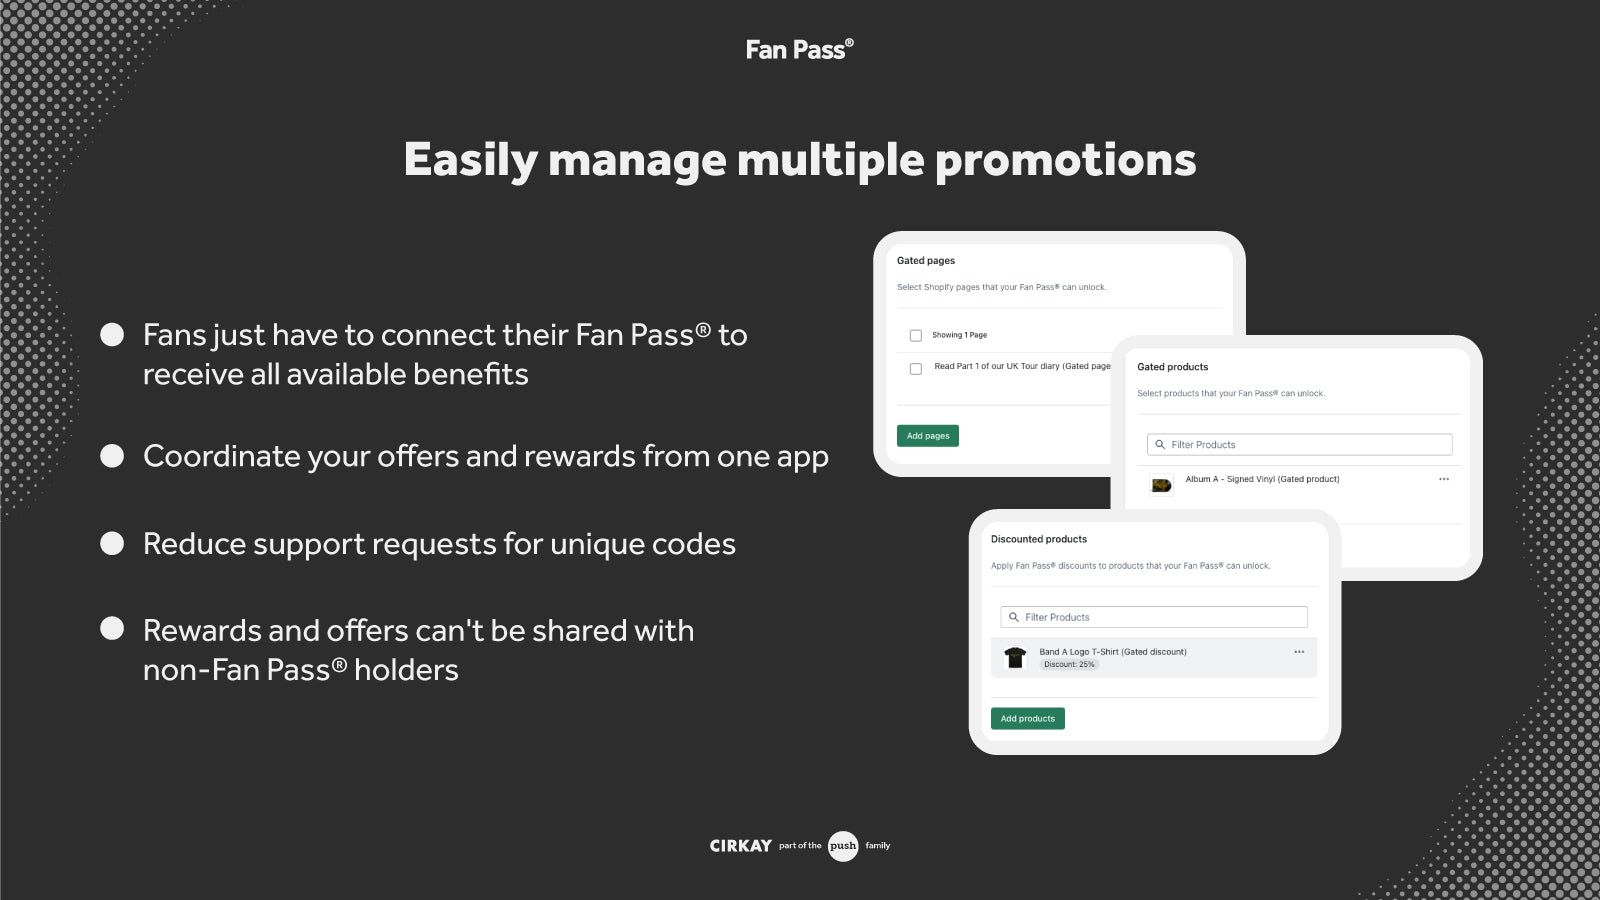 Easily manage multiple promotions